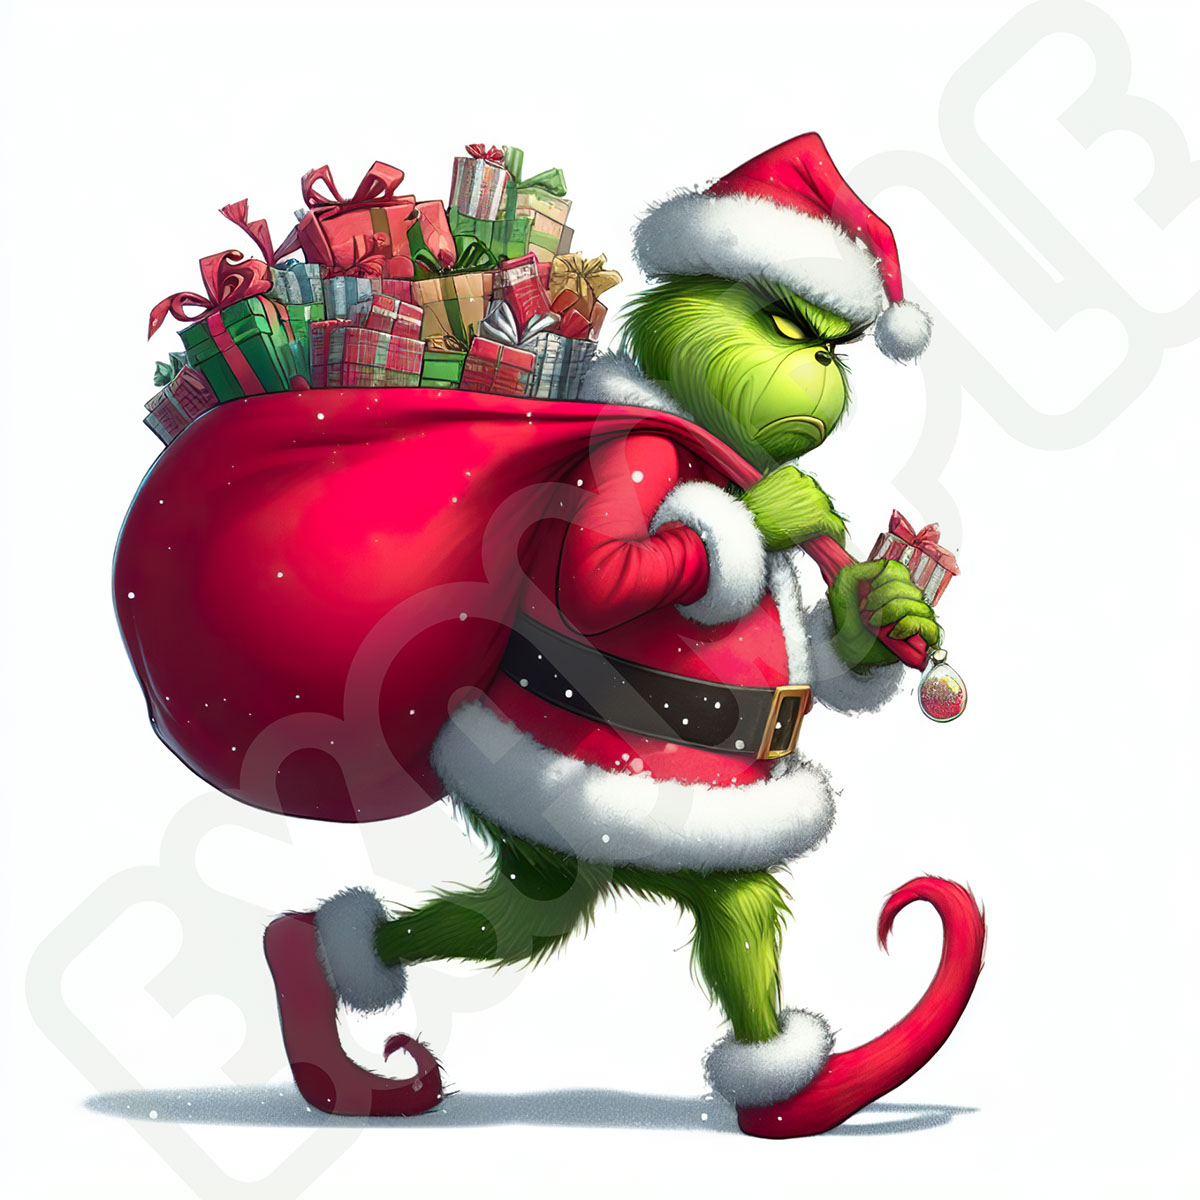 Grinch Carrying Christmas Presents rendition image